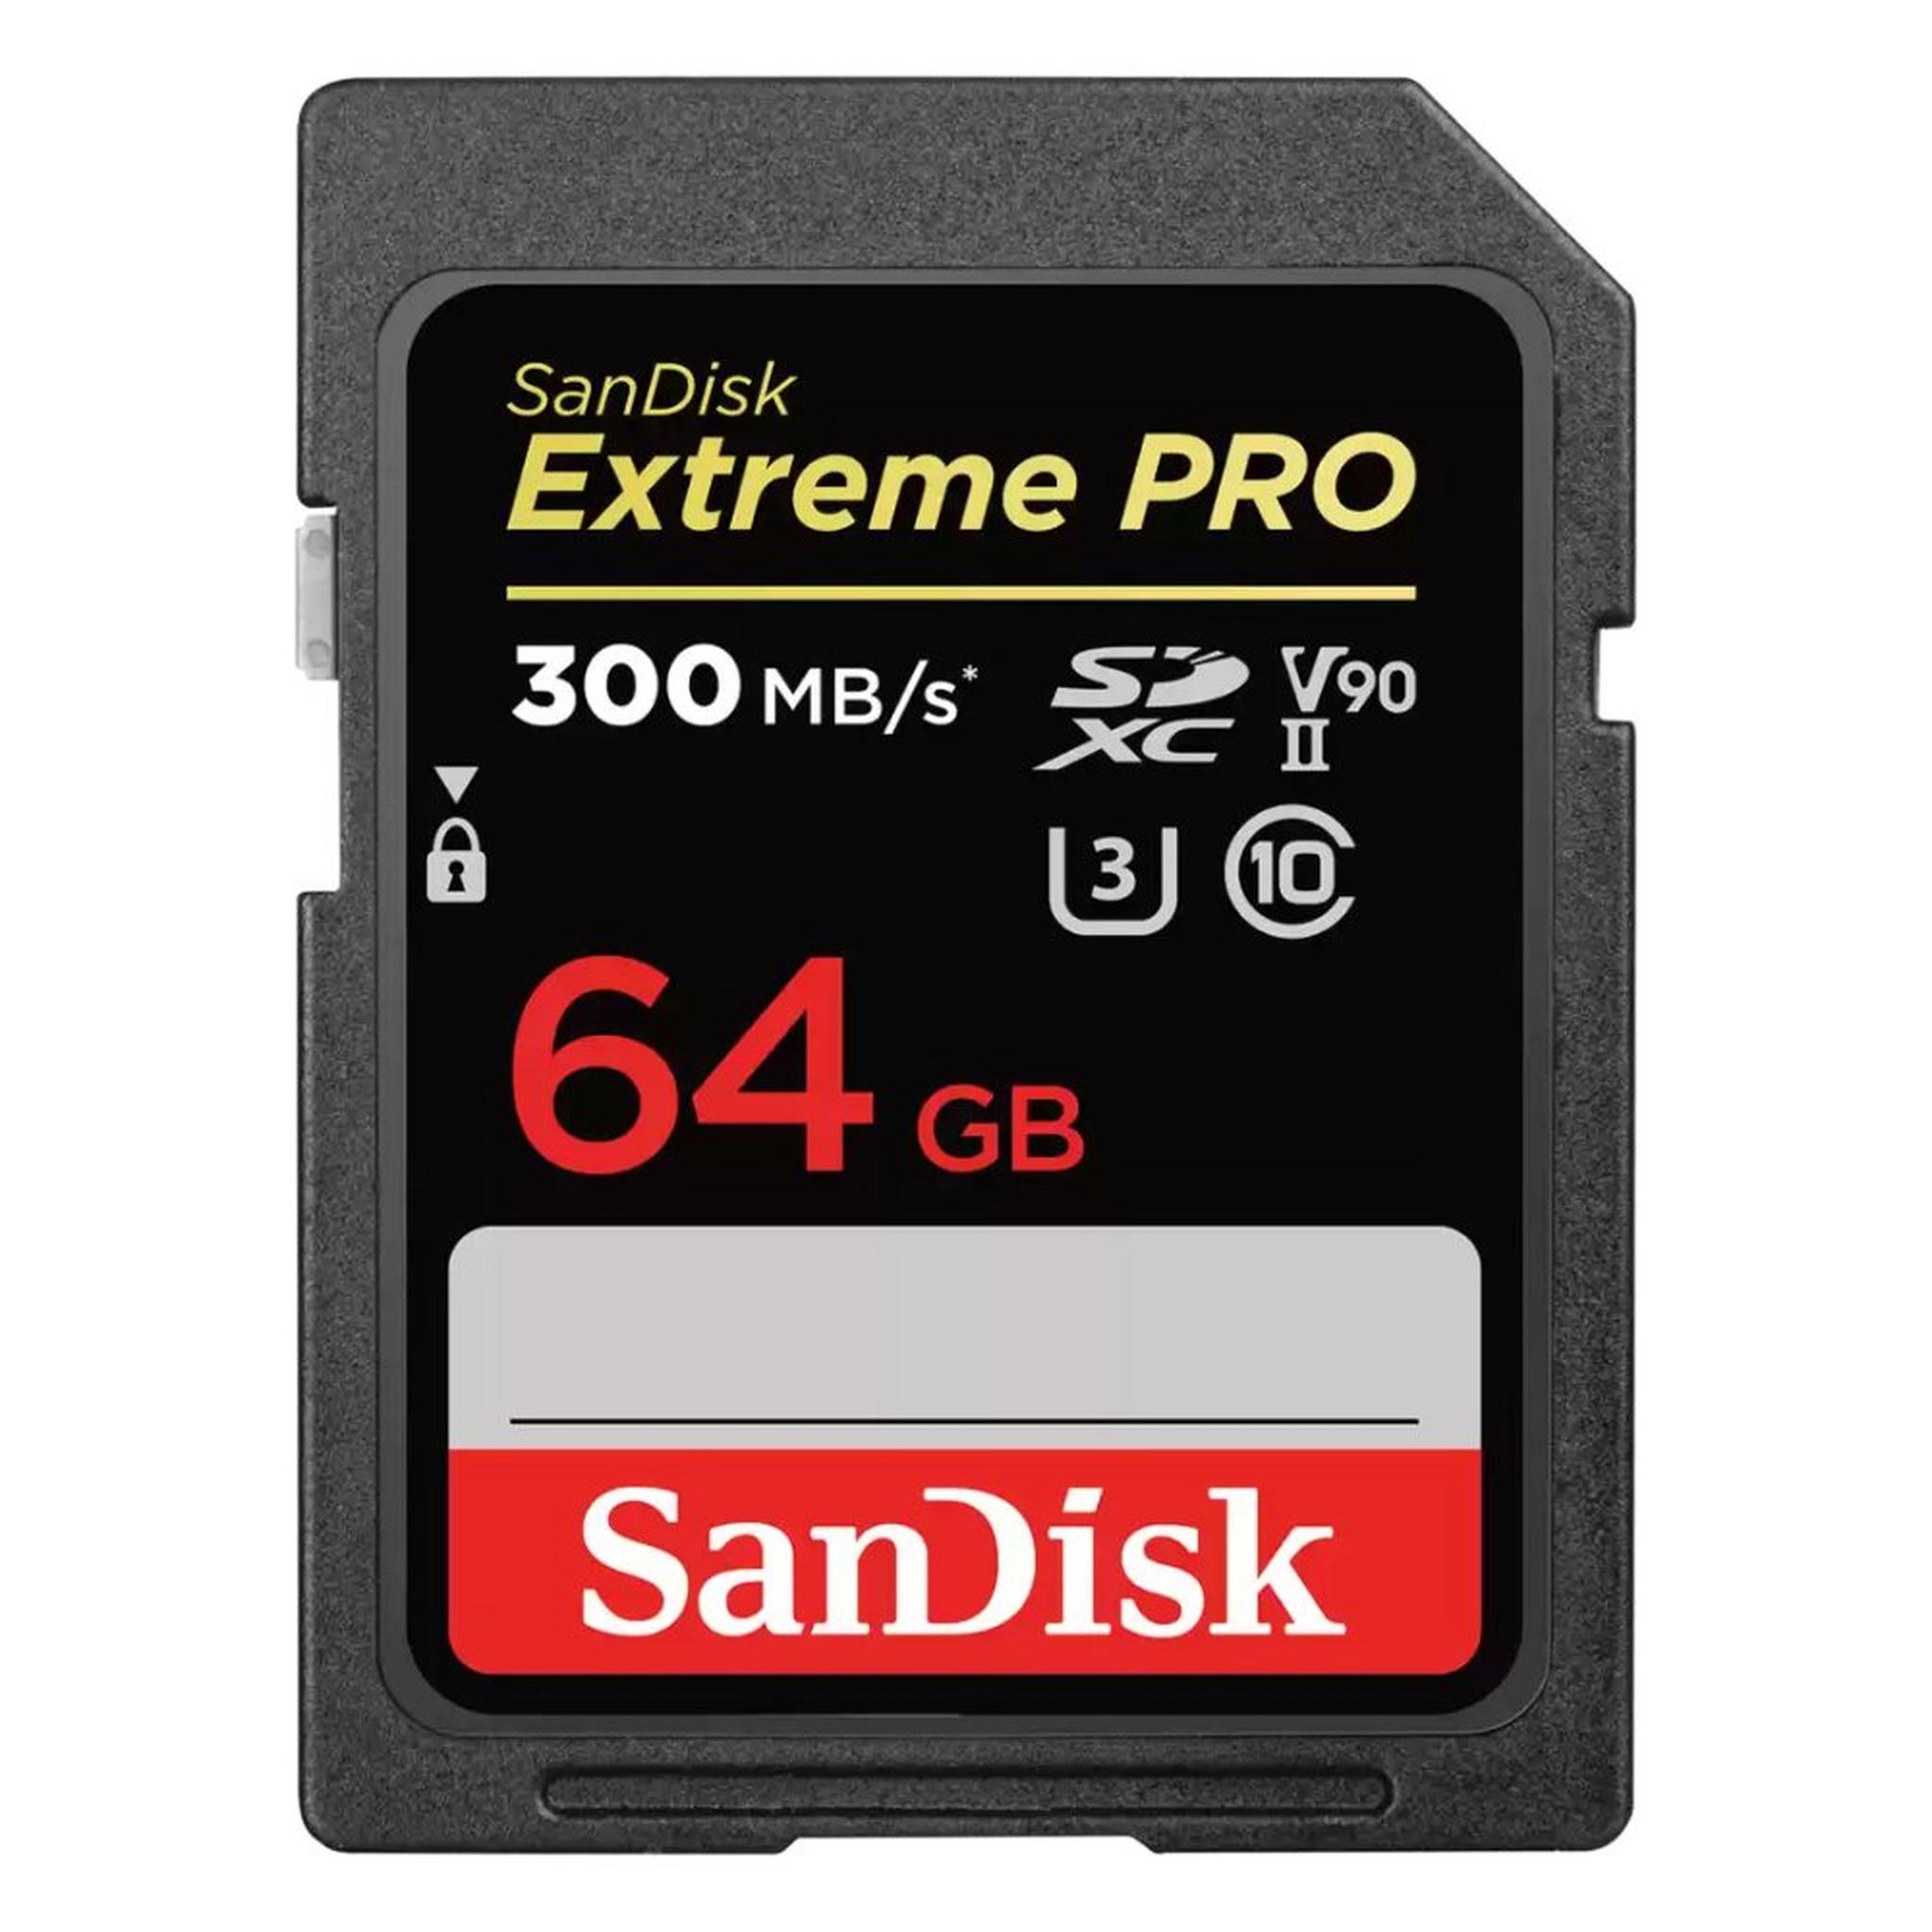 SanDisk Extreme Pro SDXC 64GB Class 10 8K UHS-II V90 Memory Card, SDSDXDK-064G-GN4IN